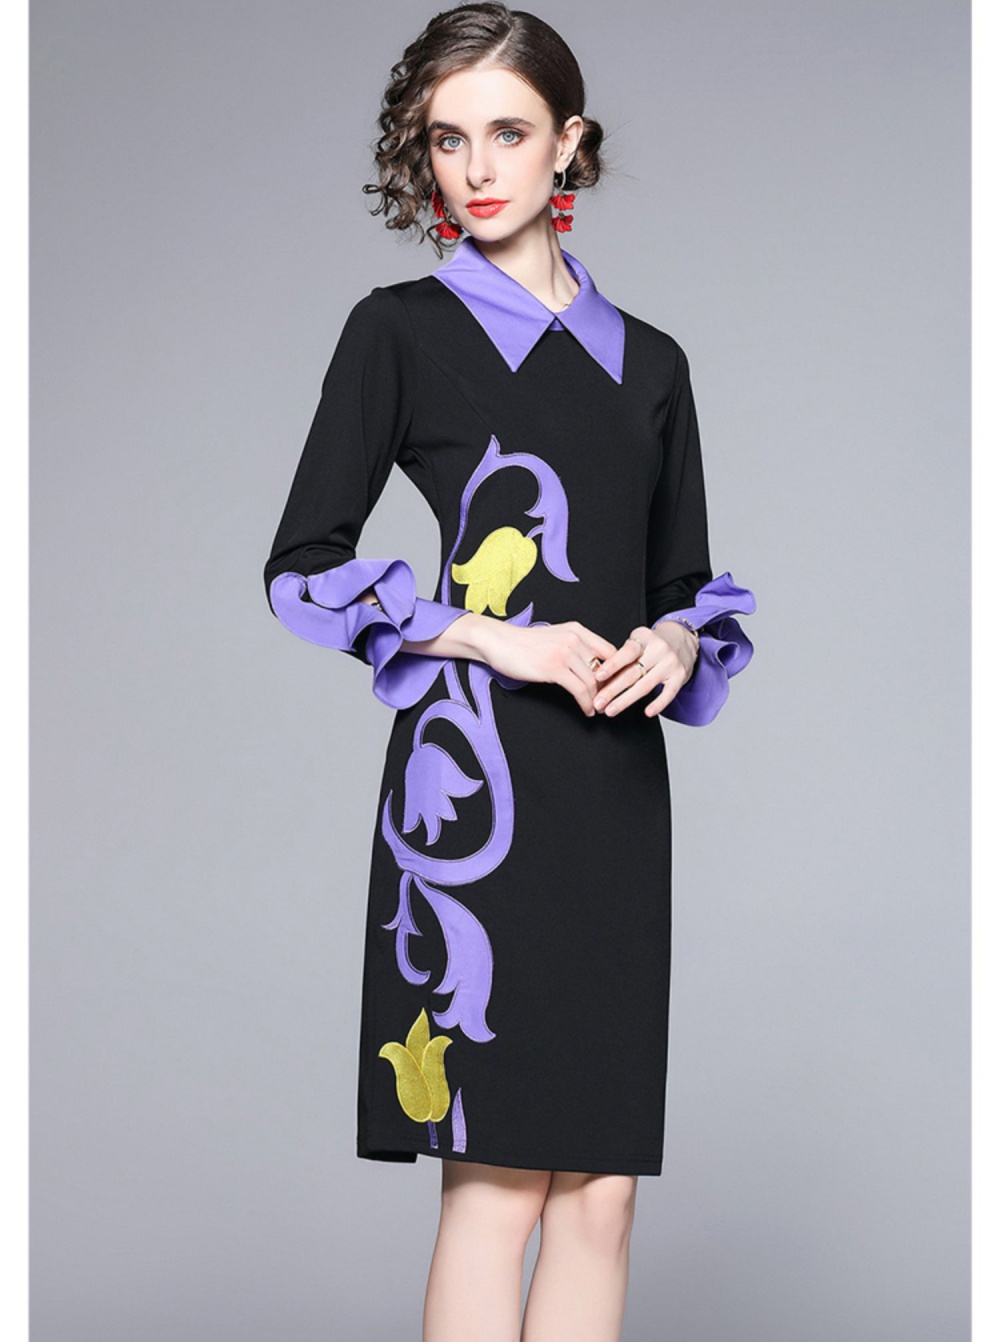 European style embroidered dress fashion long dress